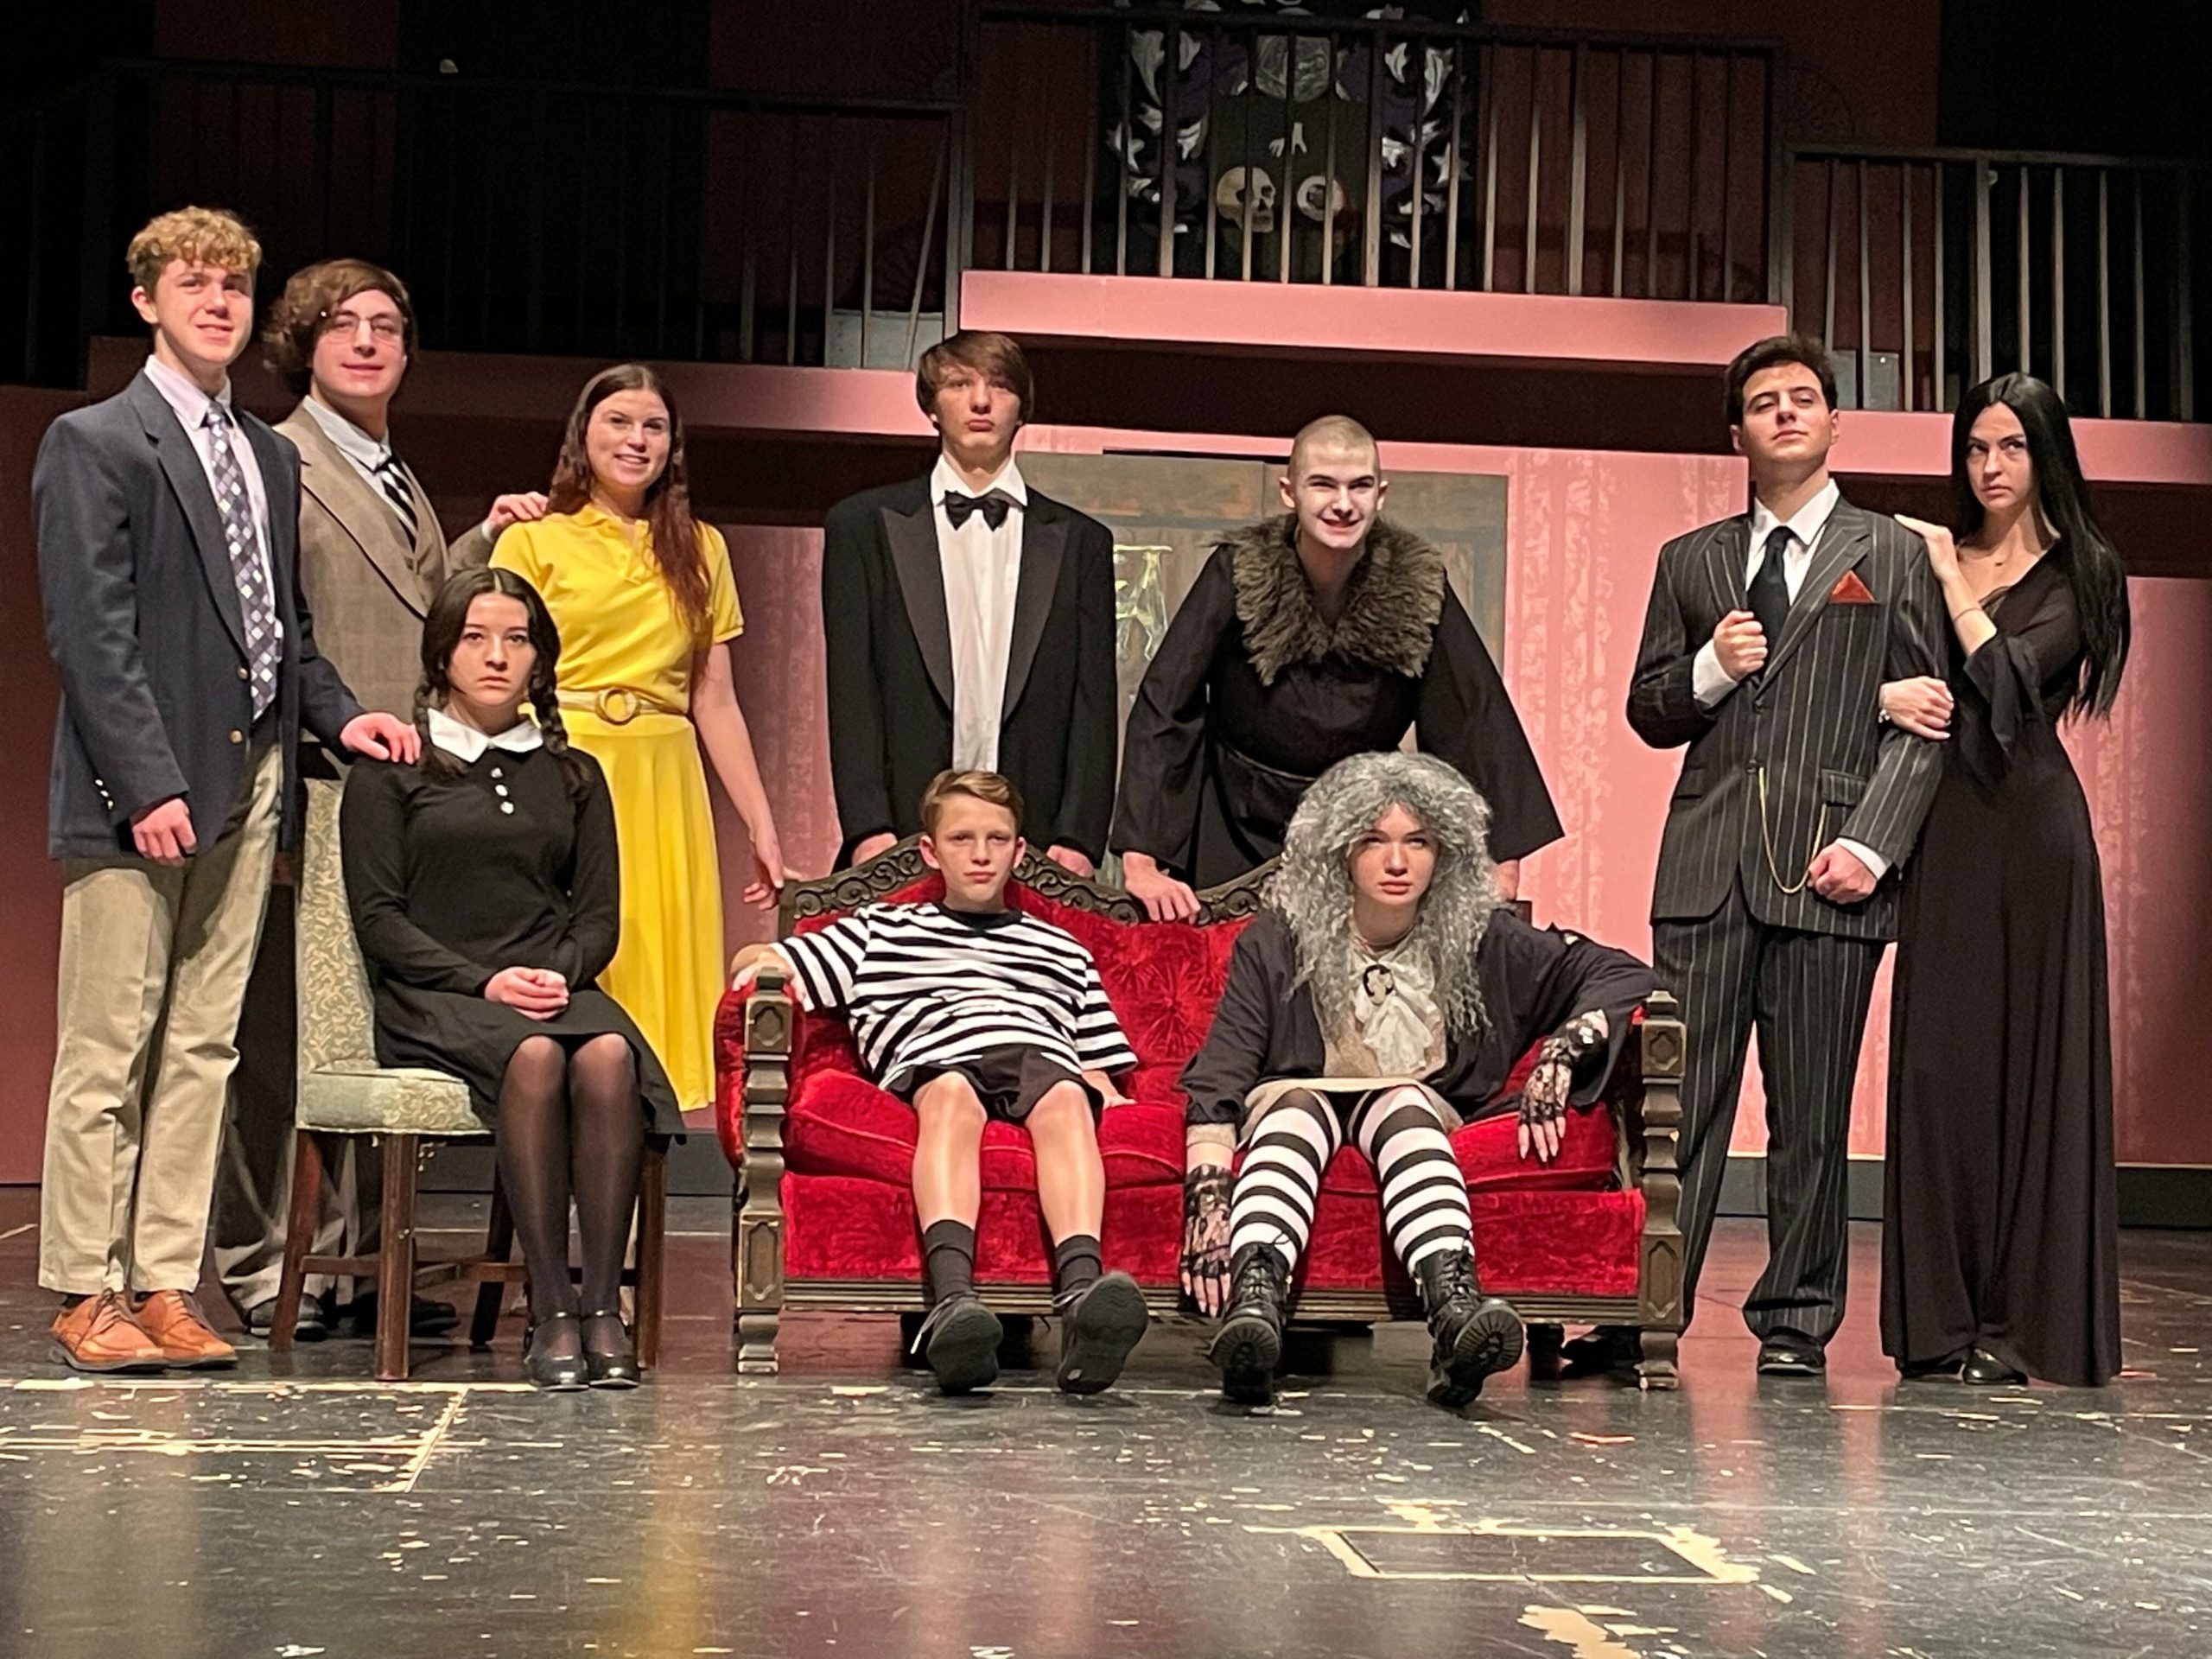 Eastport-South Manor Junior-Senior High School students in the theater and music department recently staged a musical production of “The Addams Family.”